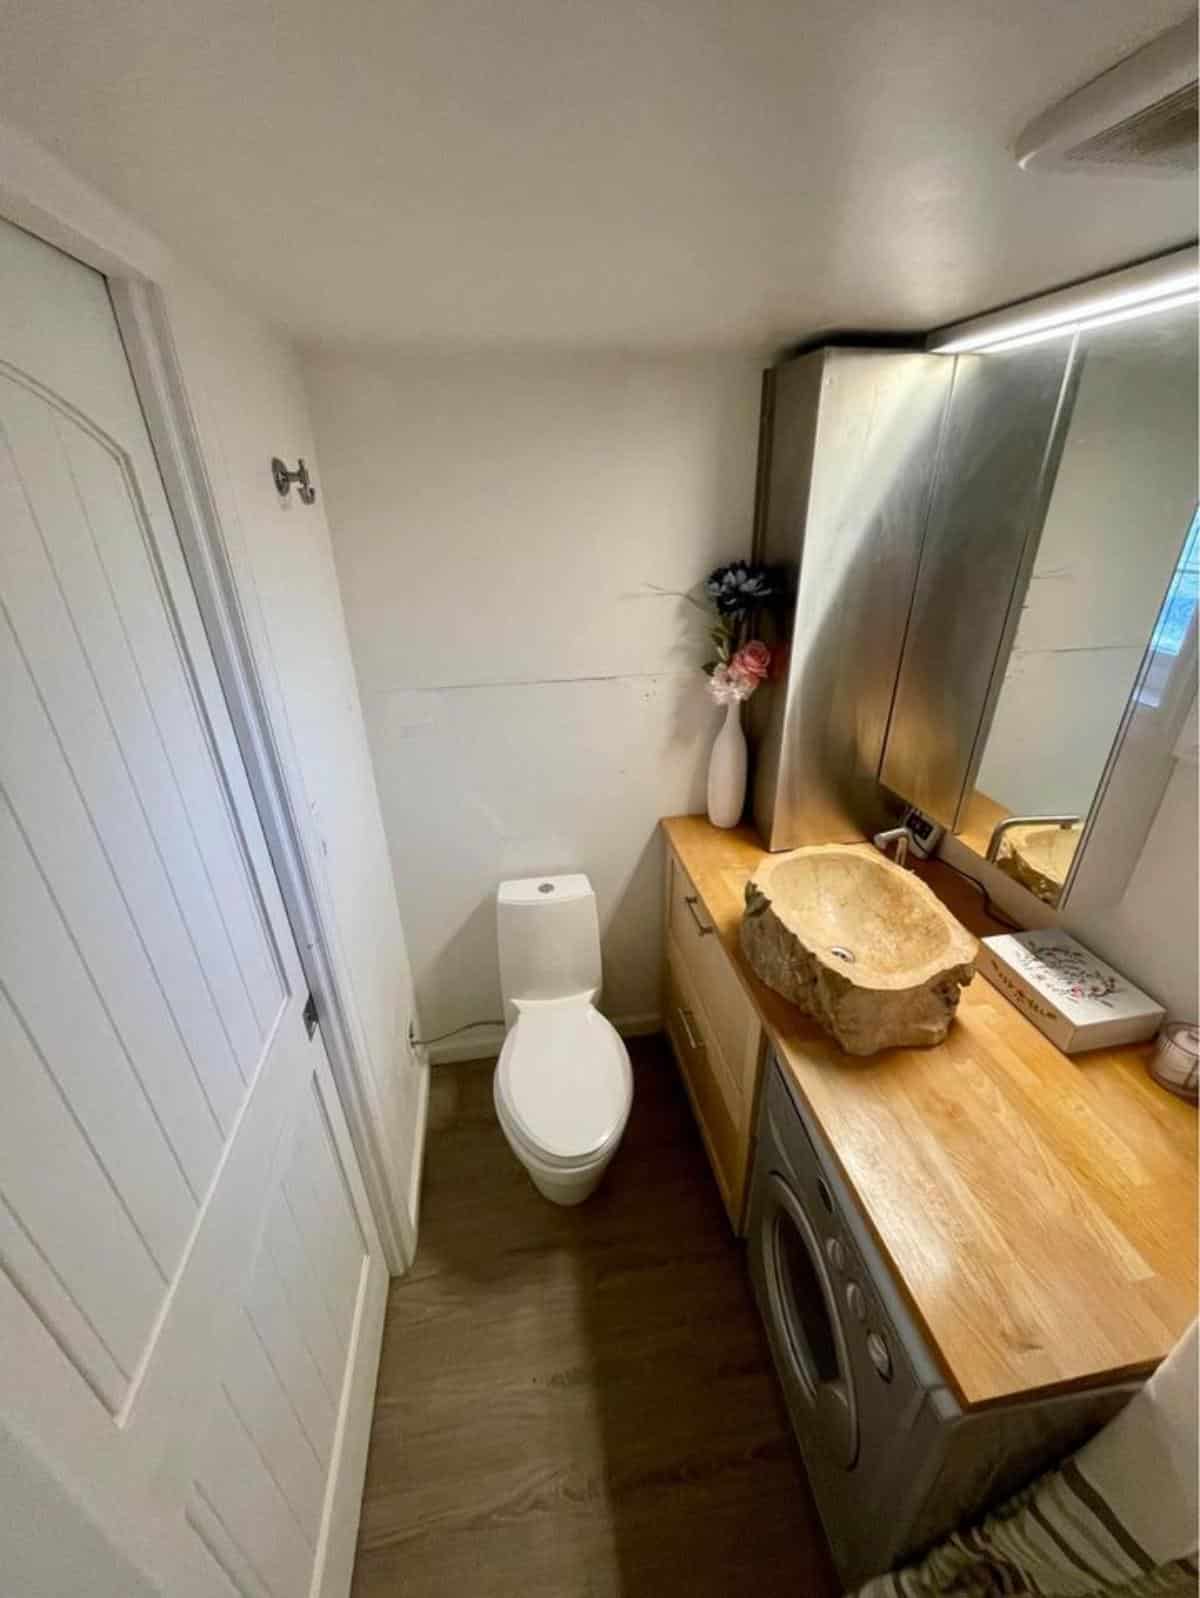 standard toilet in bathroom of double lofted home